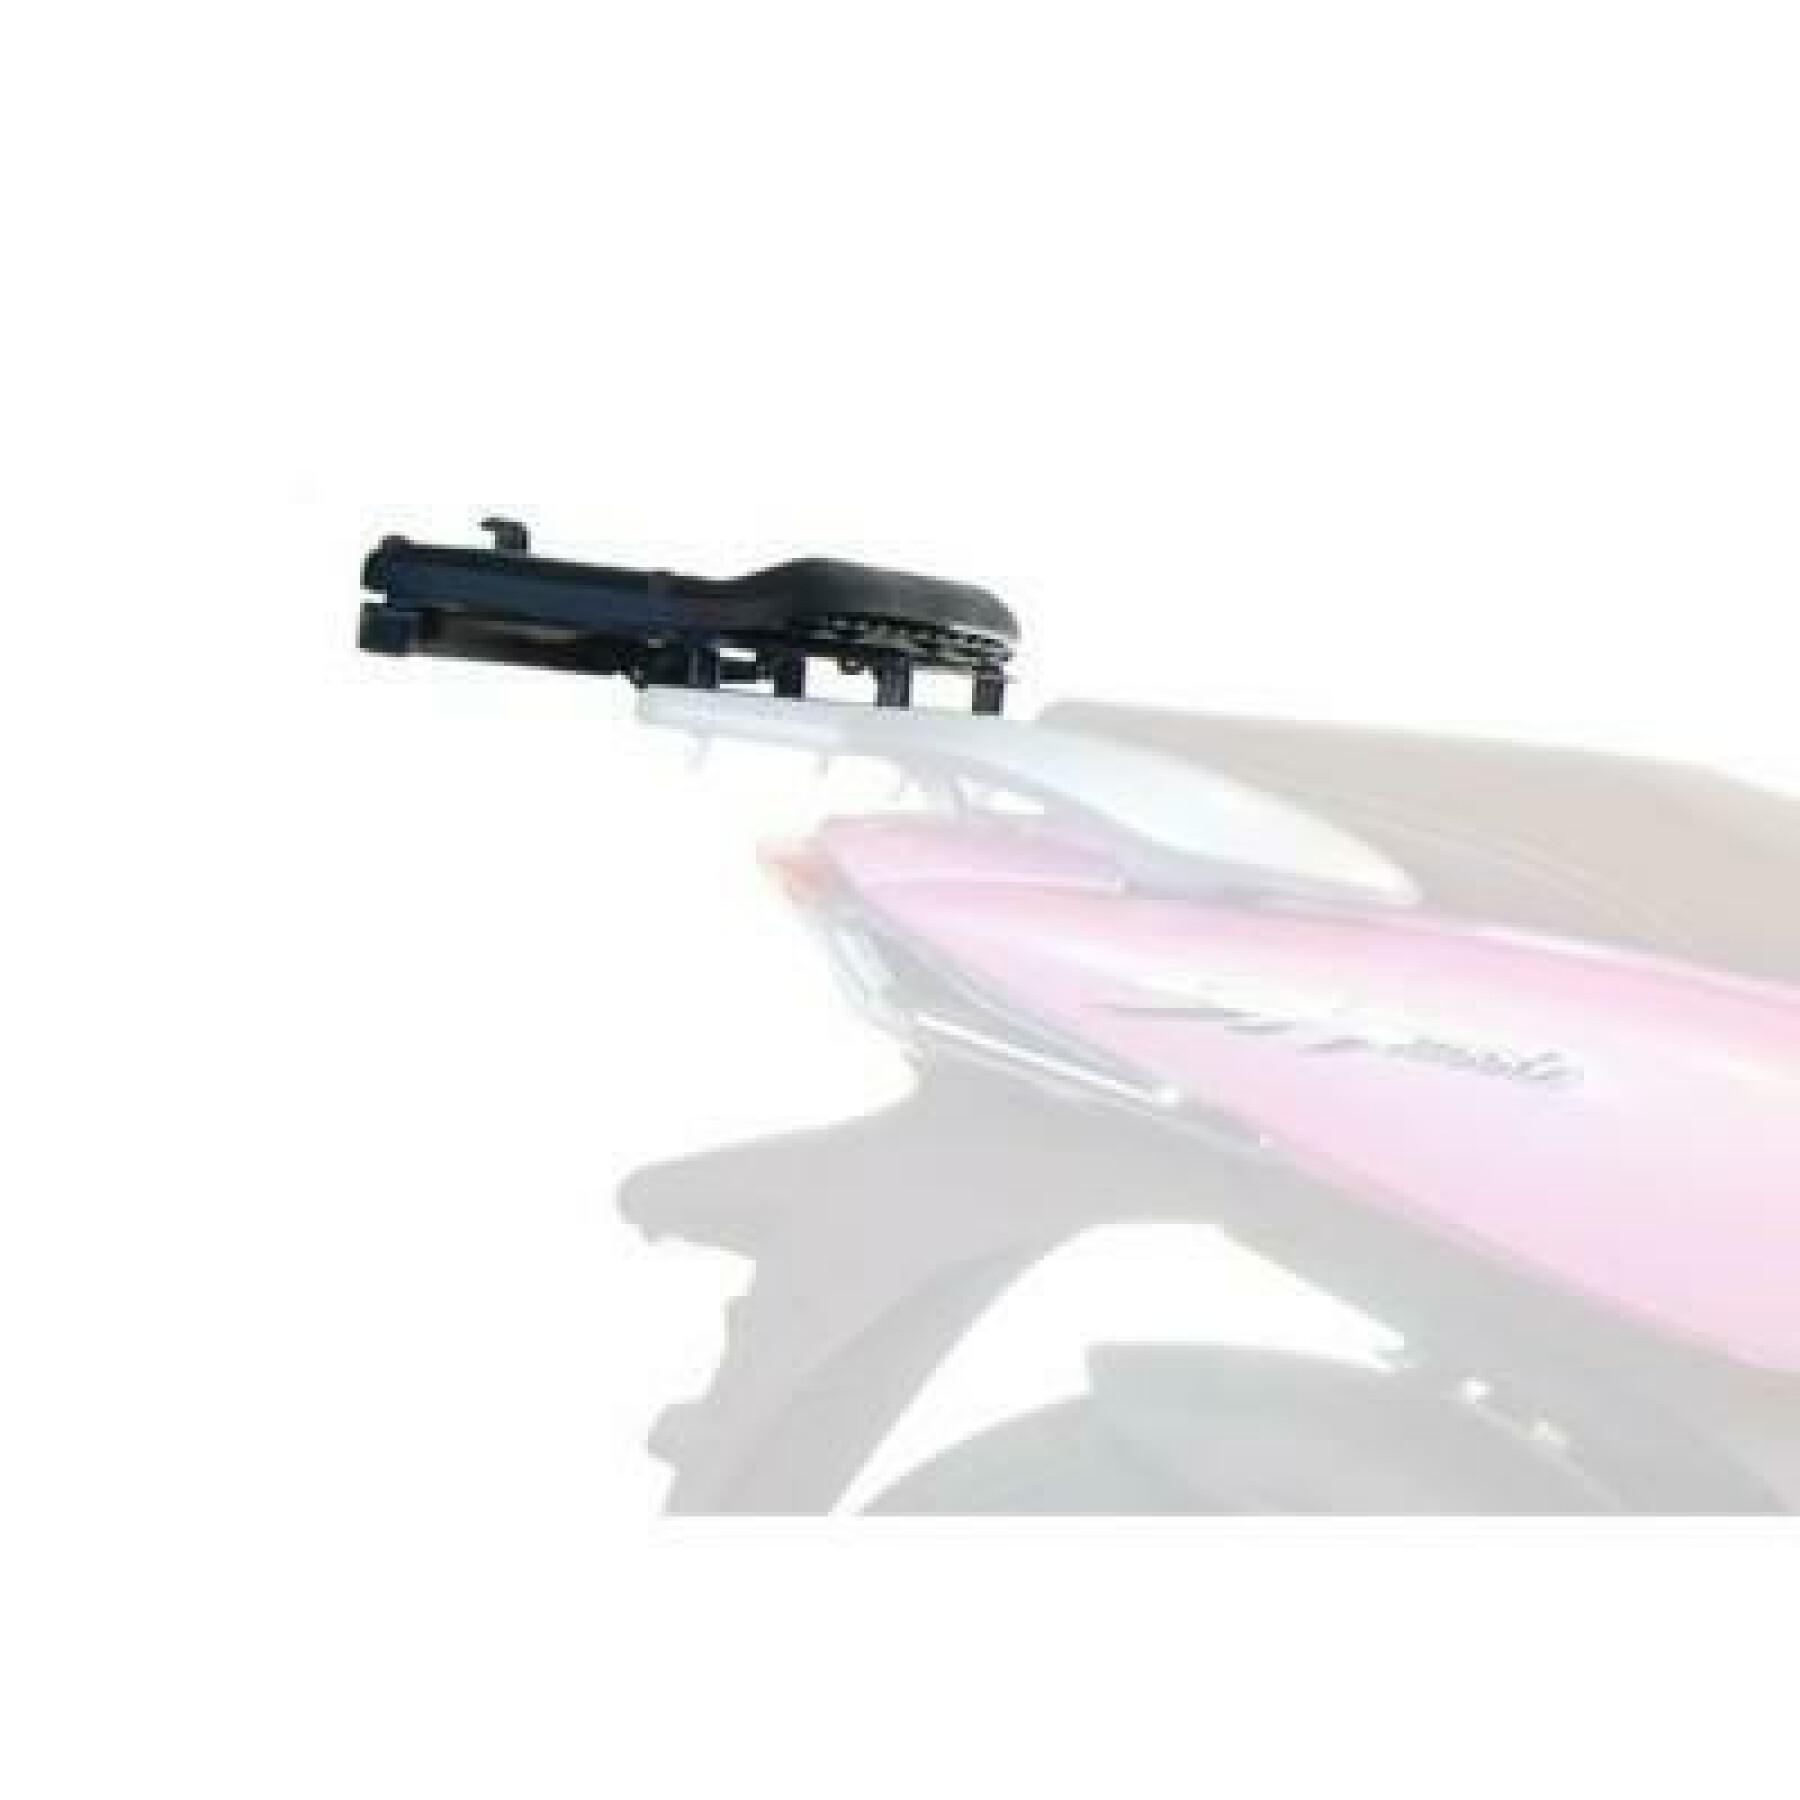 Support top case scooter Shad Honda SH 125 Mode (14 à 21)